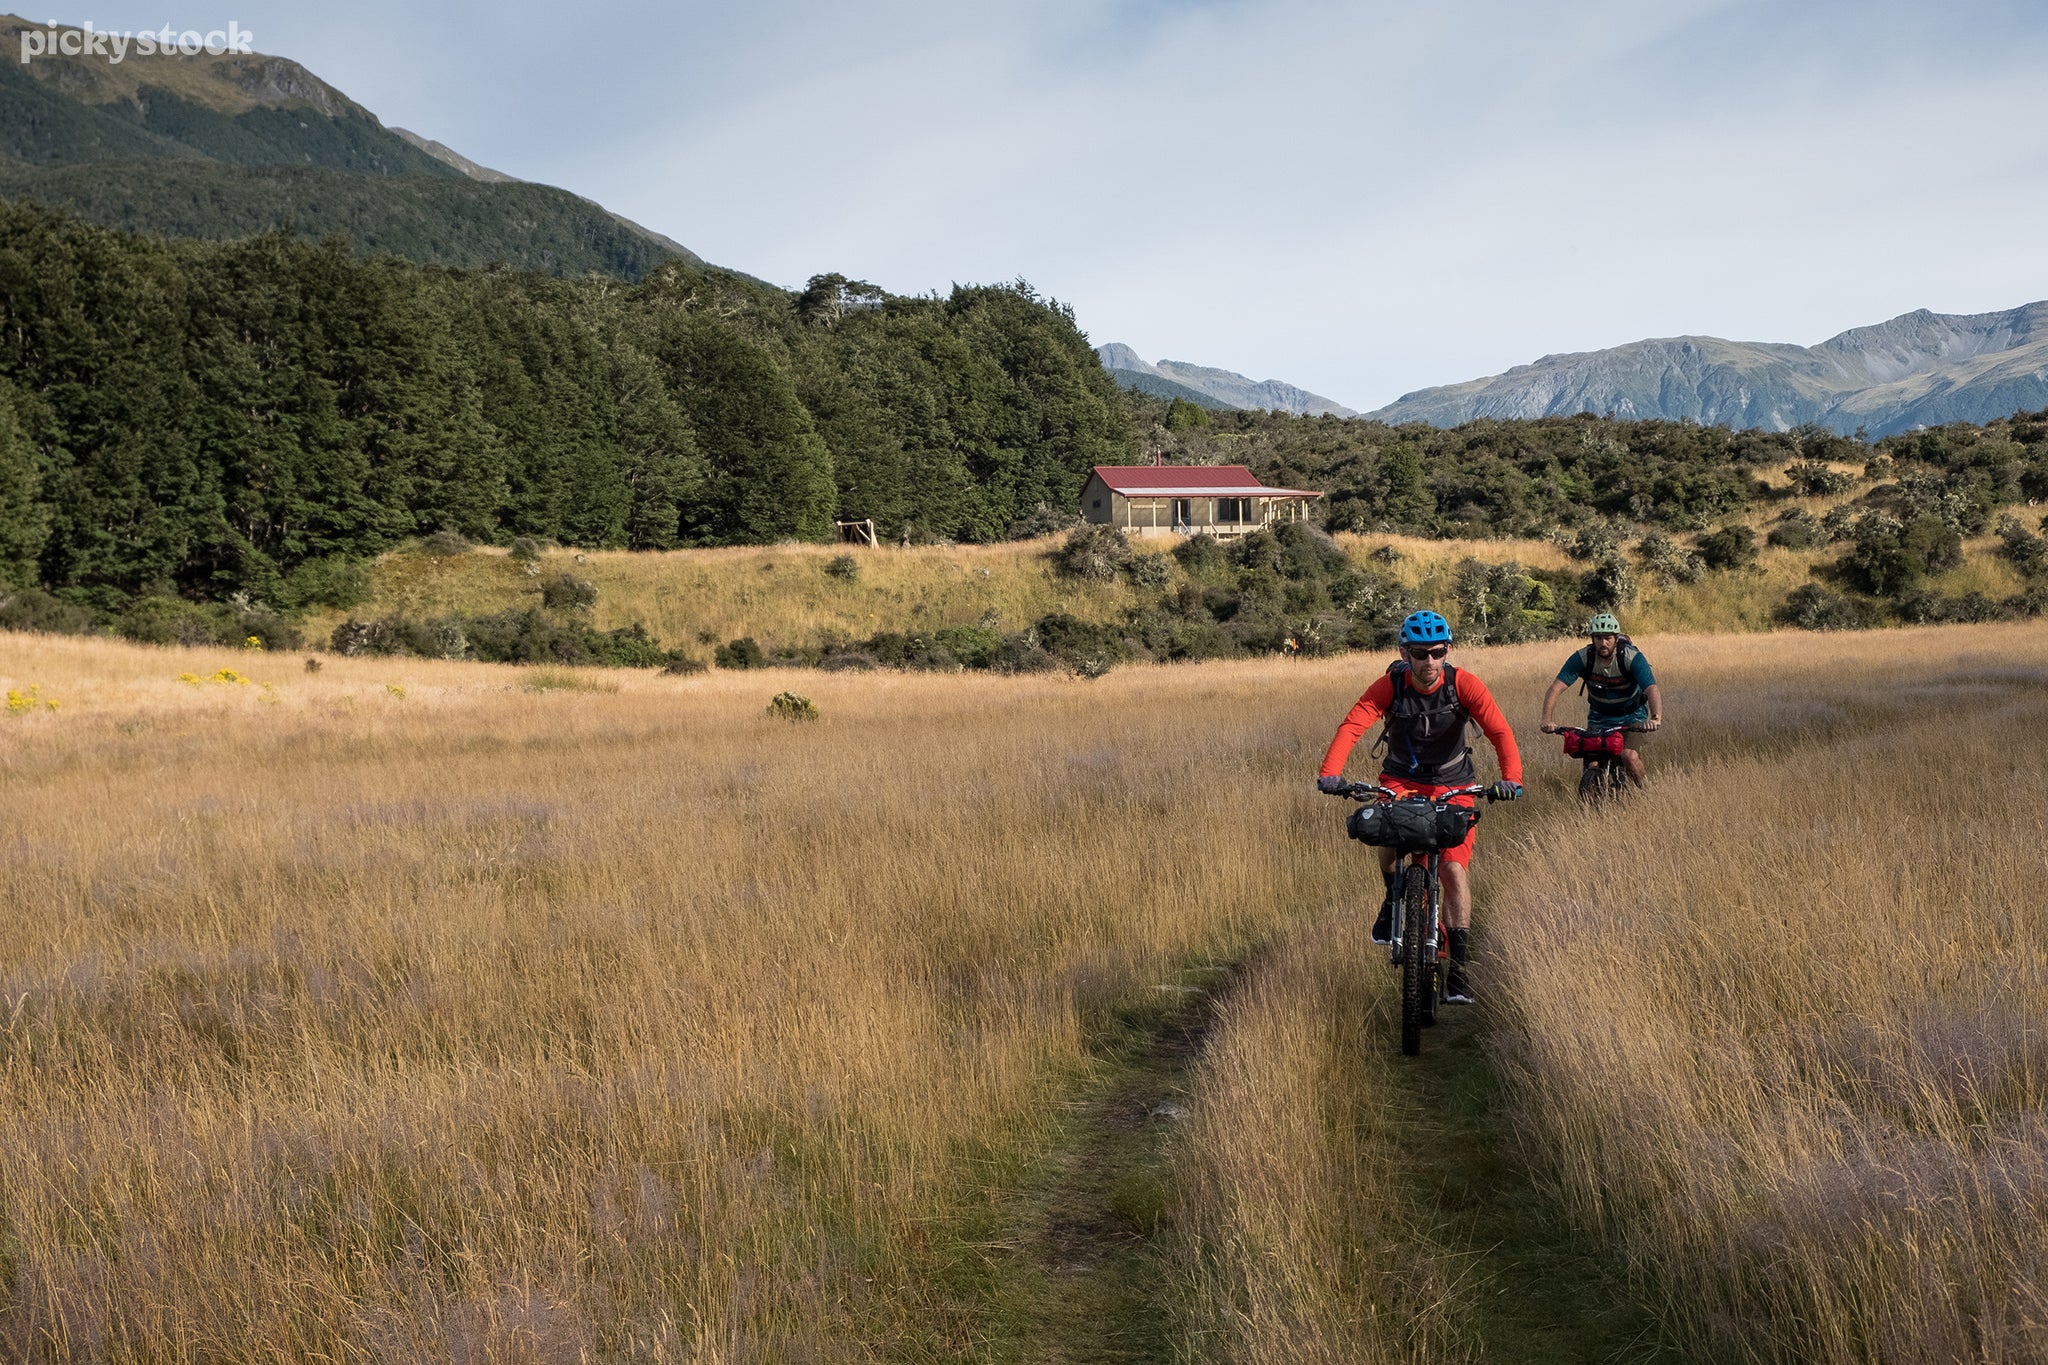 A landscape of two men biking through a tall grass trail. The foremost rider is kitted out in bright orange and blue while the backmost wears simple greens. A small cottage with a red roof is poised amongst the grassy hinterlands.